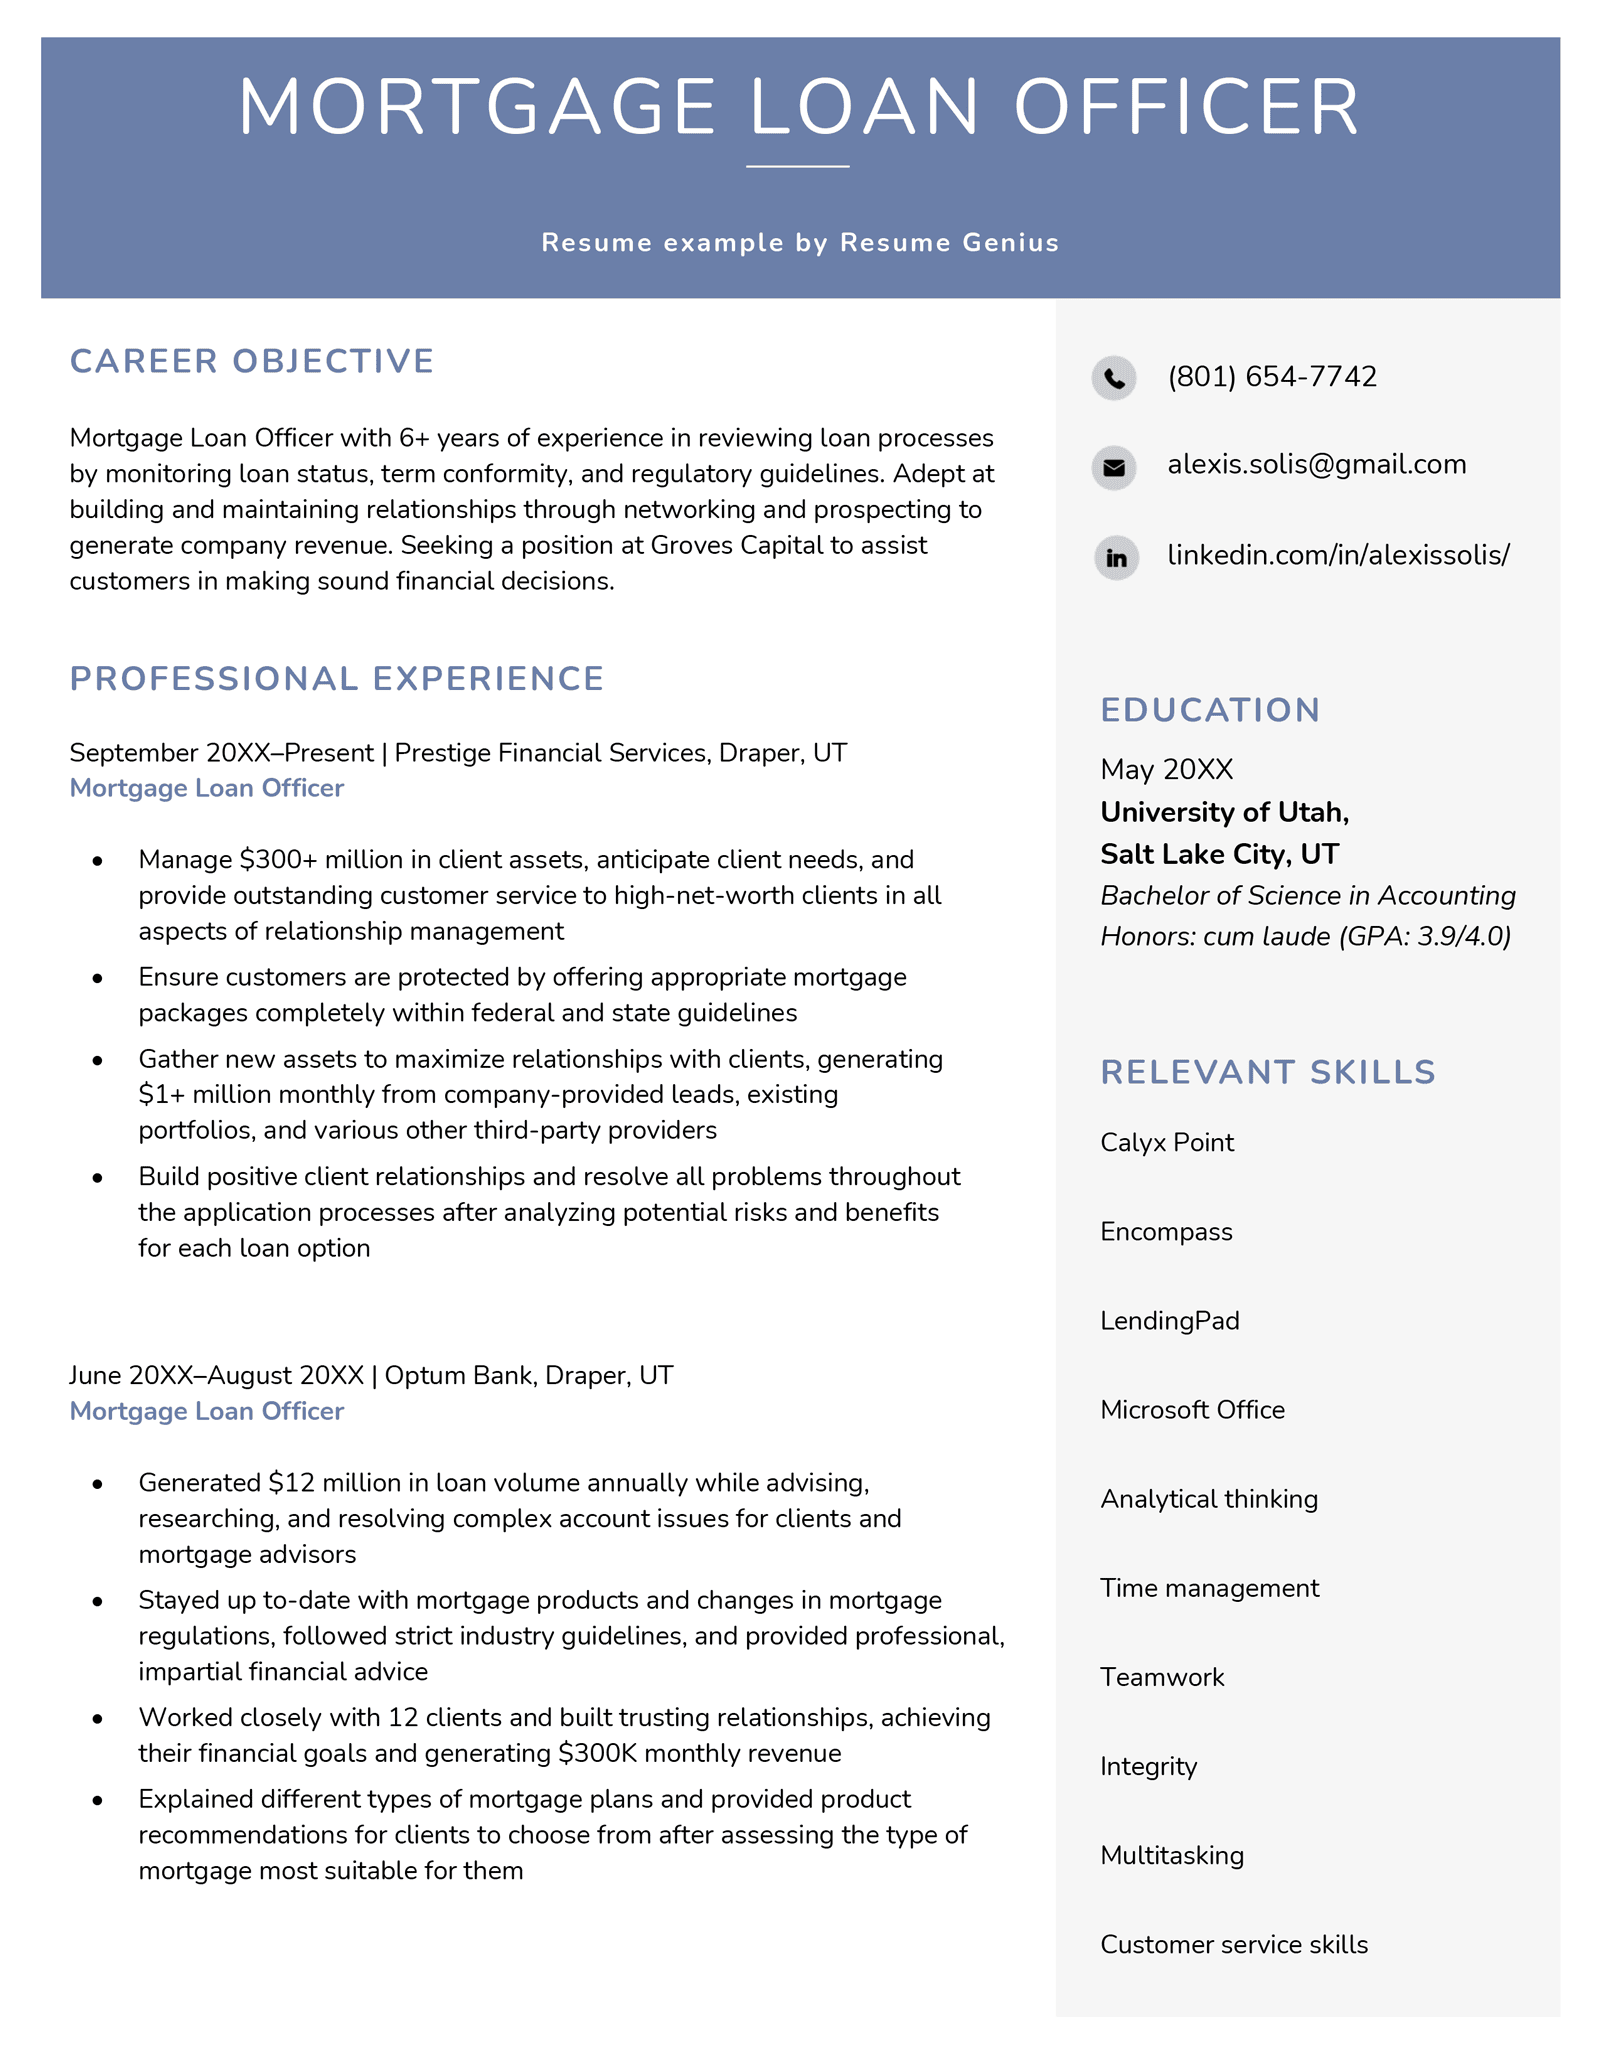 A mortgage loan officer resume example with an eye-catching wide blue header